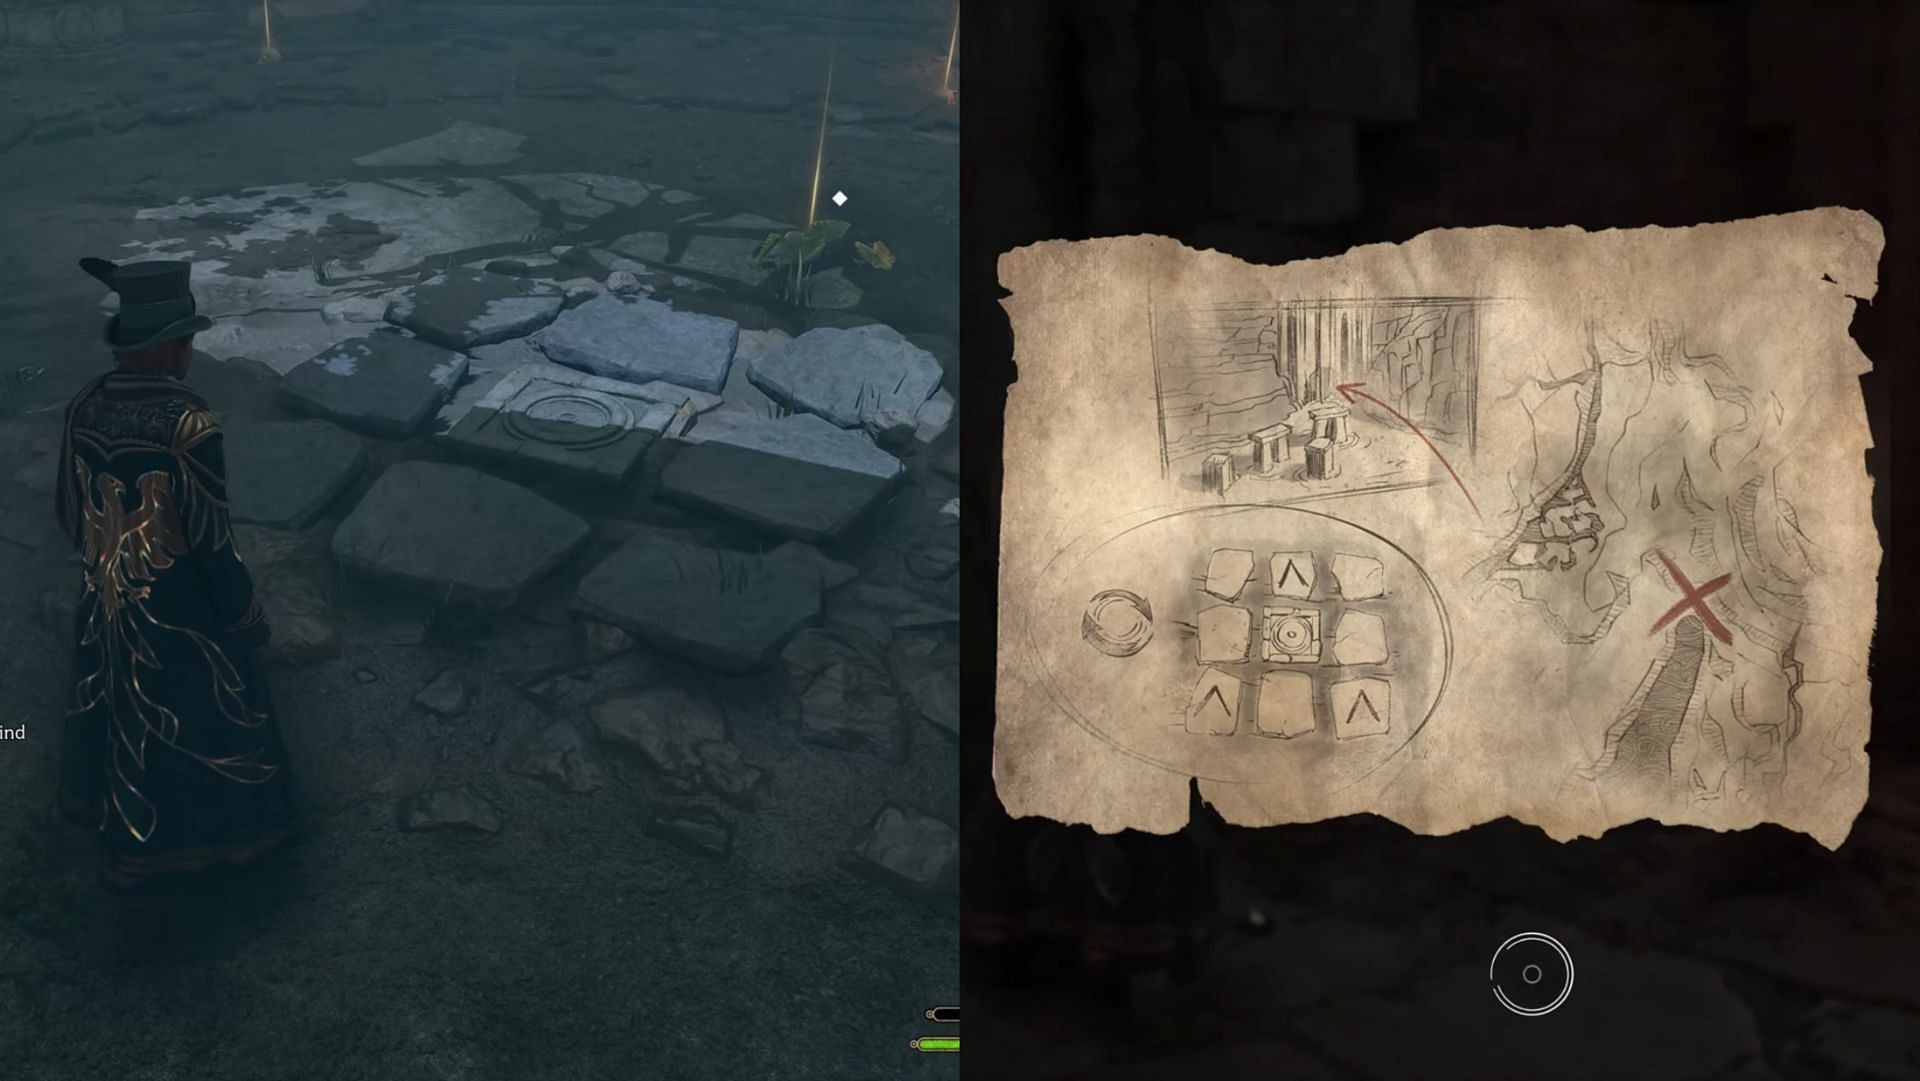 How to get the Hogwarts Legacy Cursed Tomb treasure